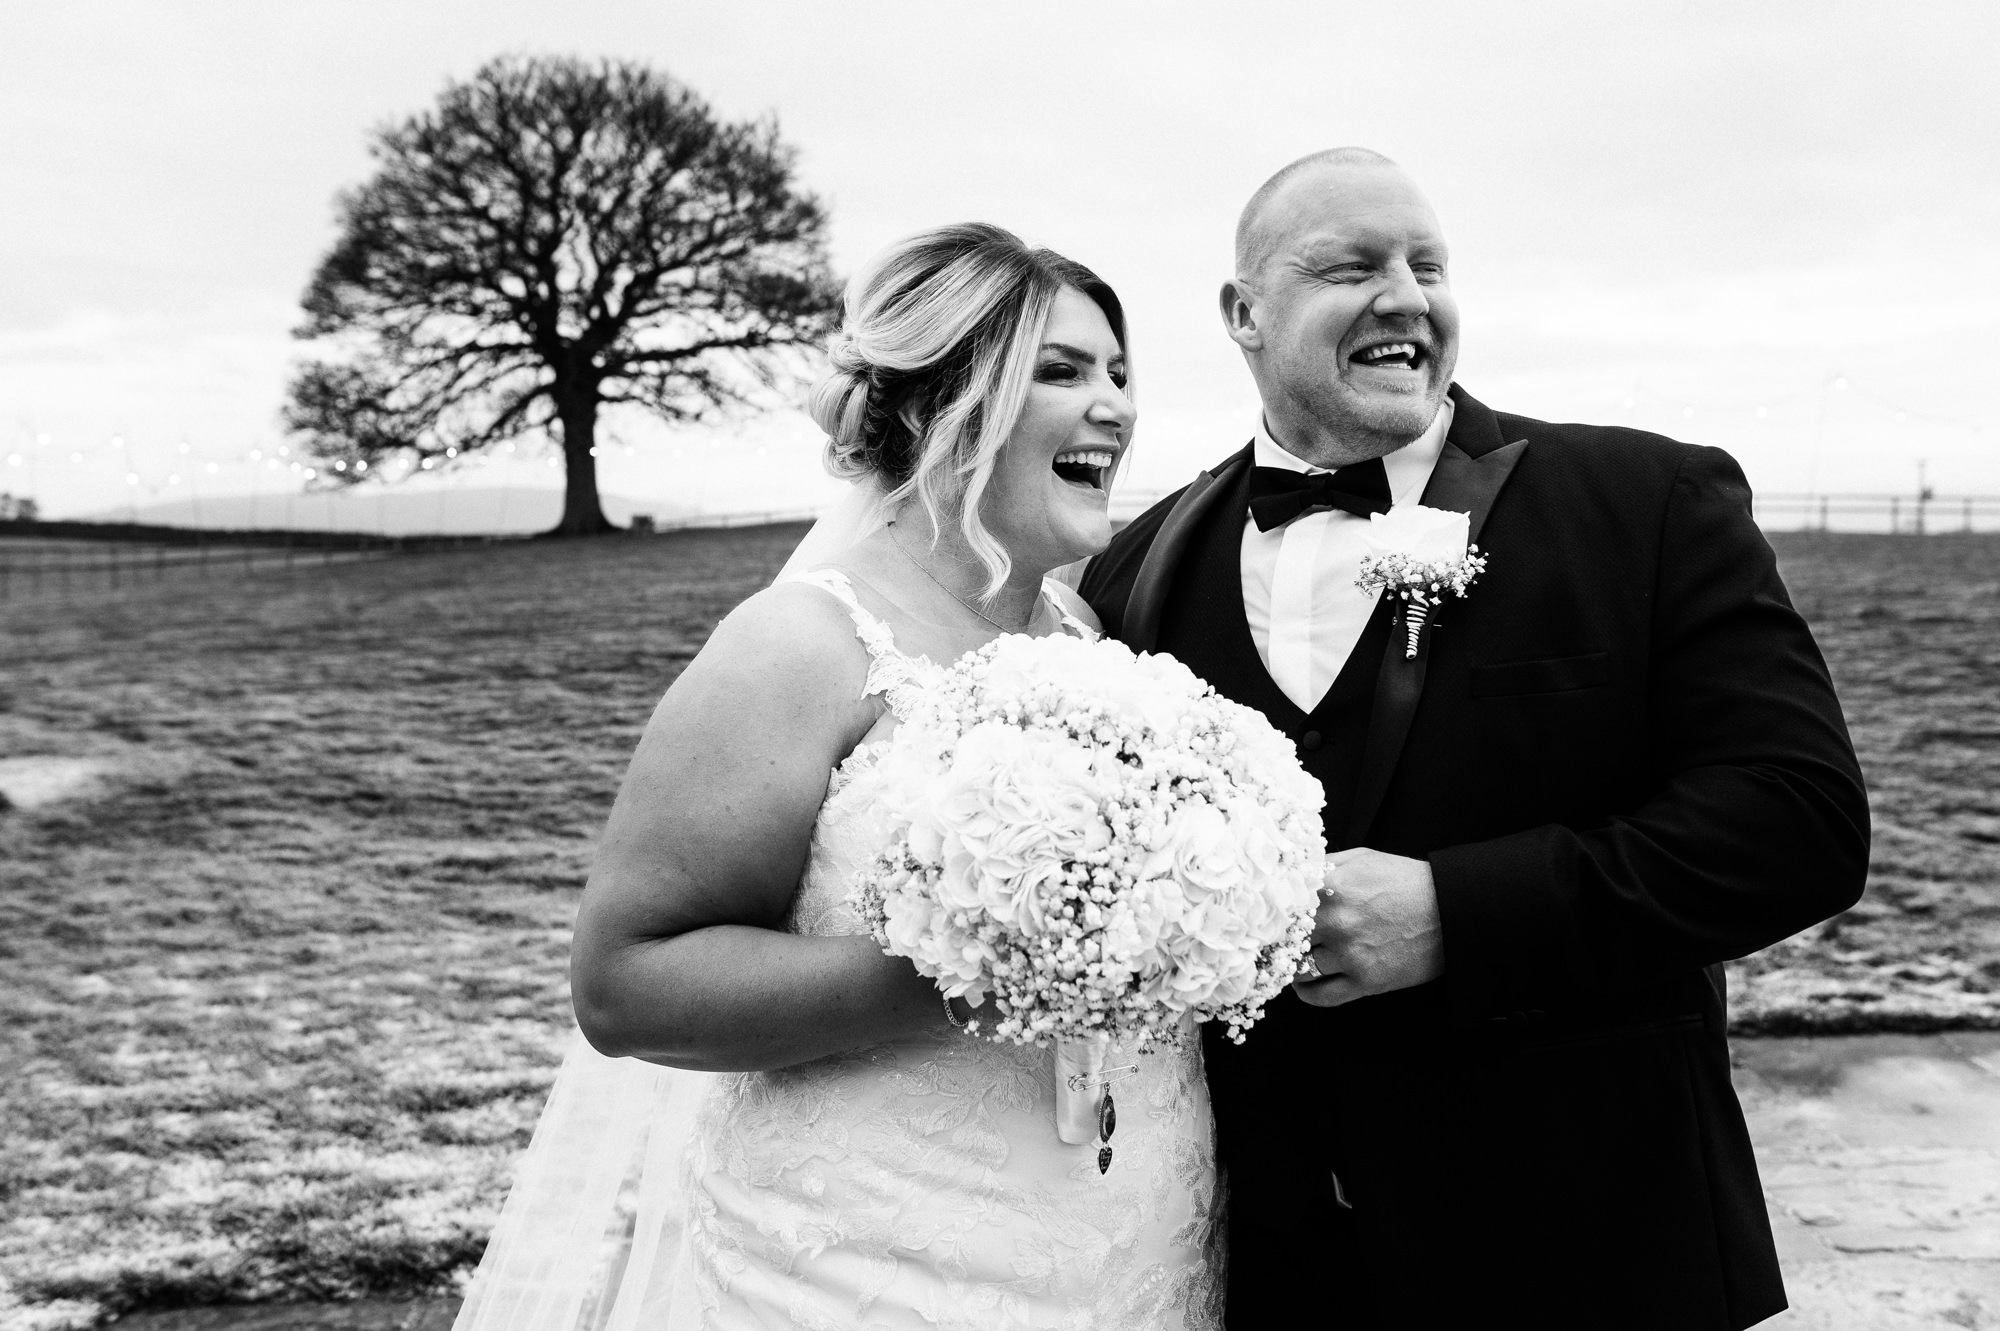 relaxed and fun wedding portraits at heaton house farm during winter